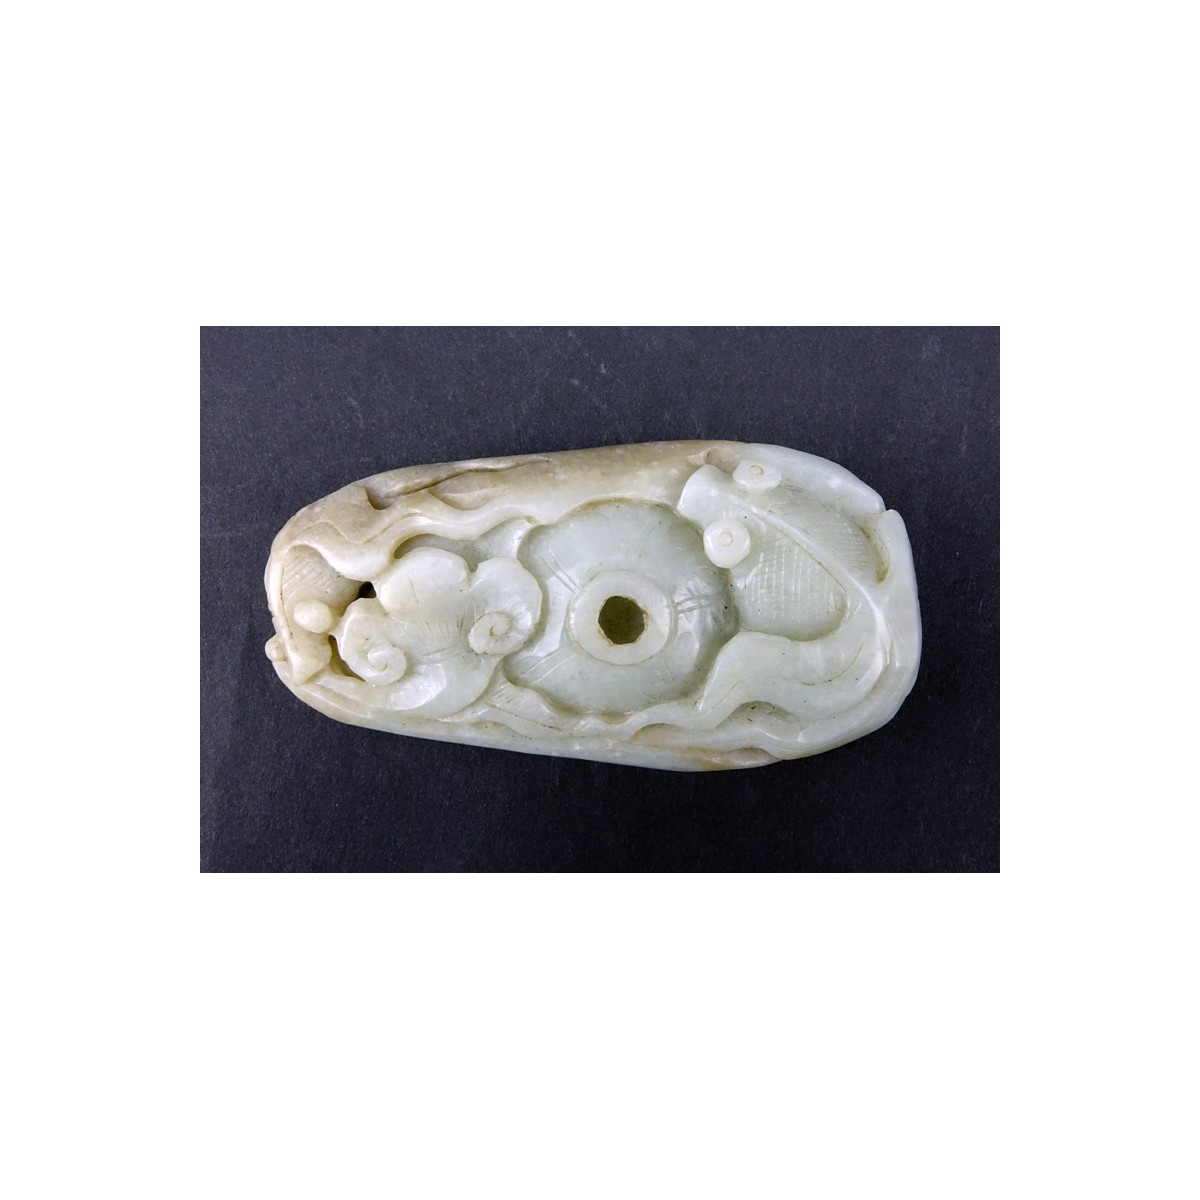 19/20th Century Chinese Carved Jade Pendant. Natural wear. Measures 4" H x 